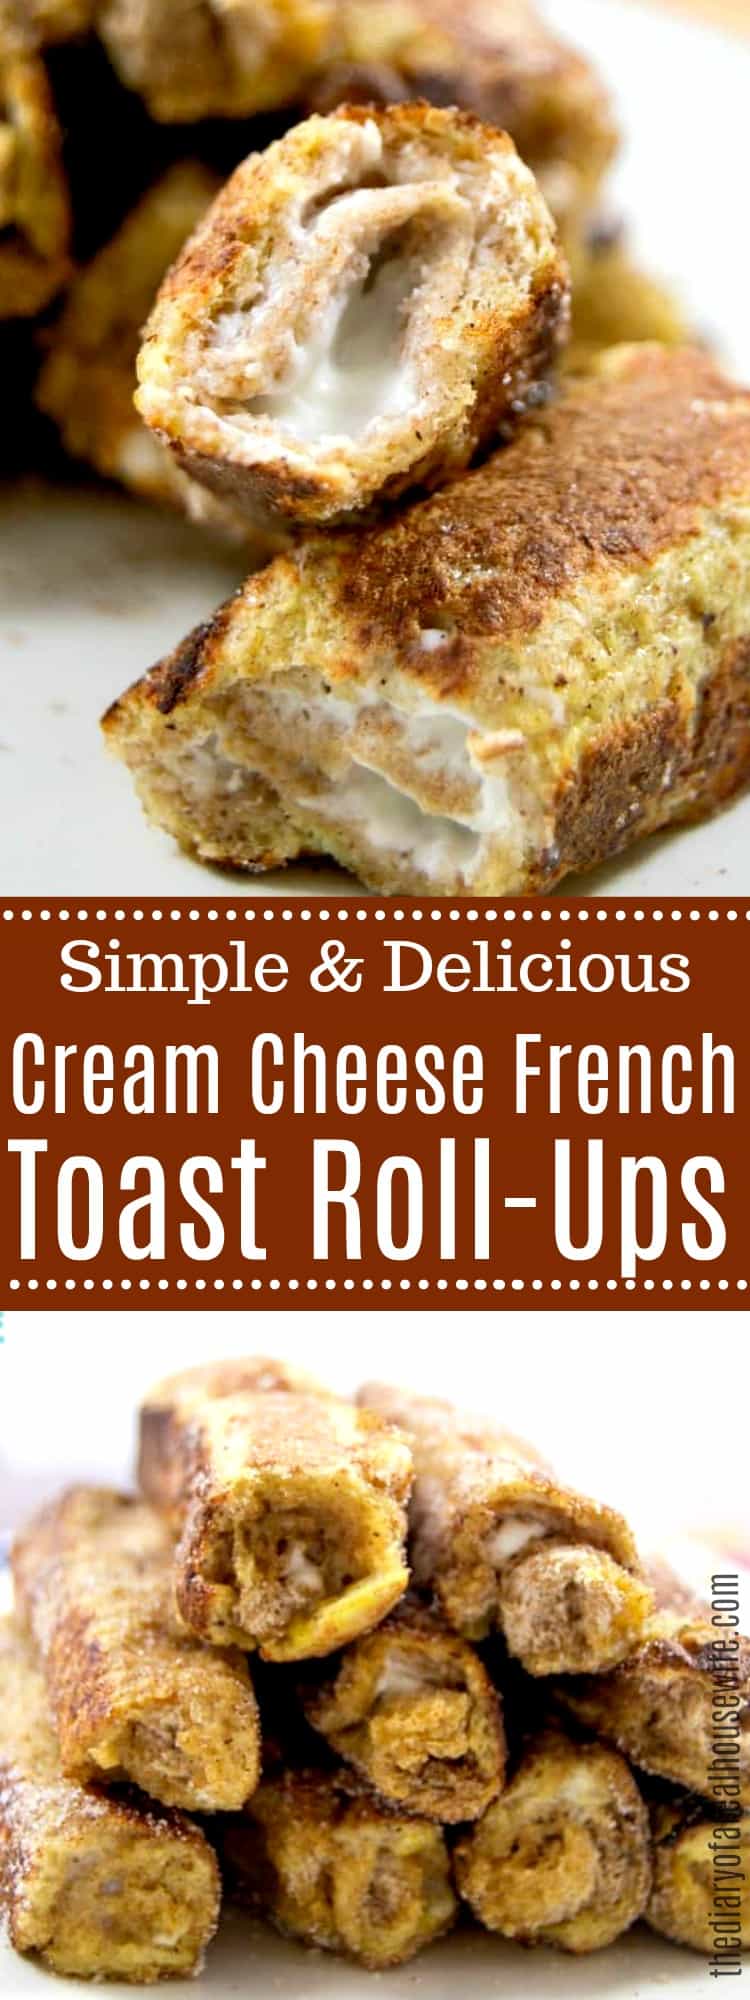 Cream Cheese French Toast Roll-Ups